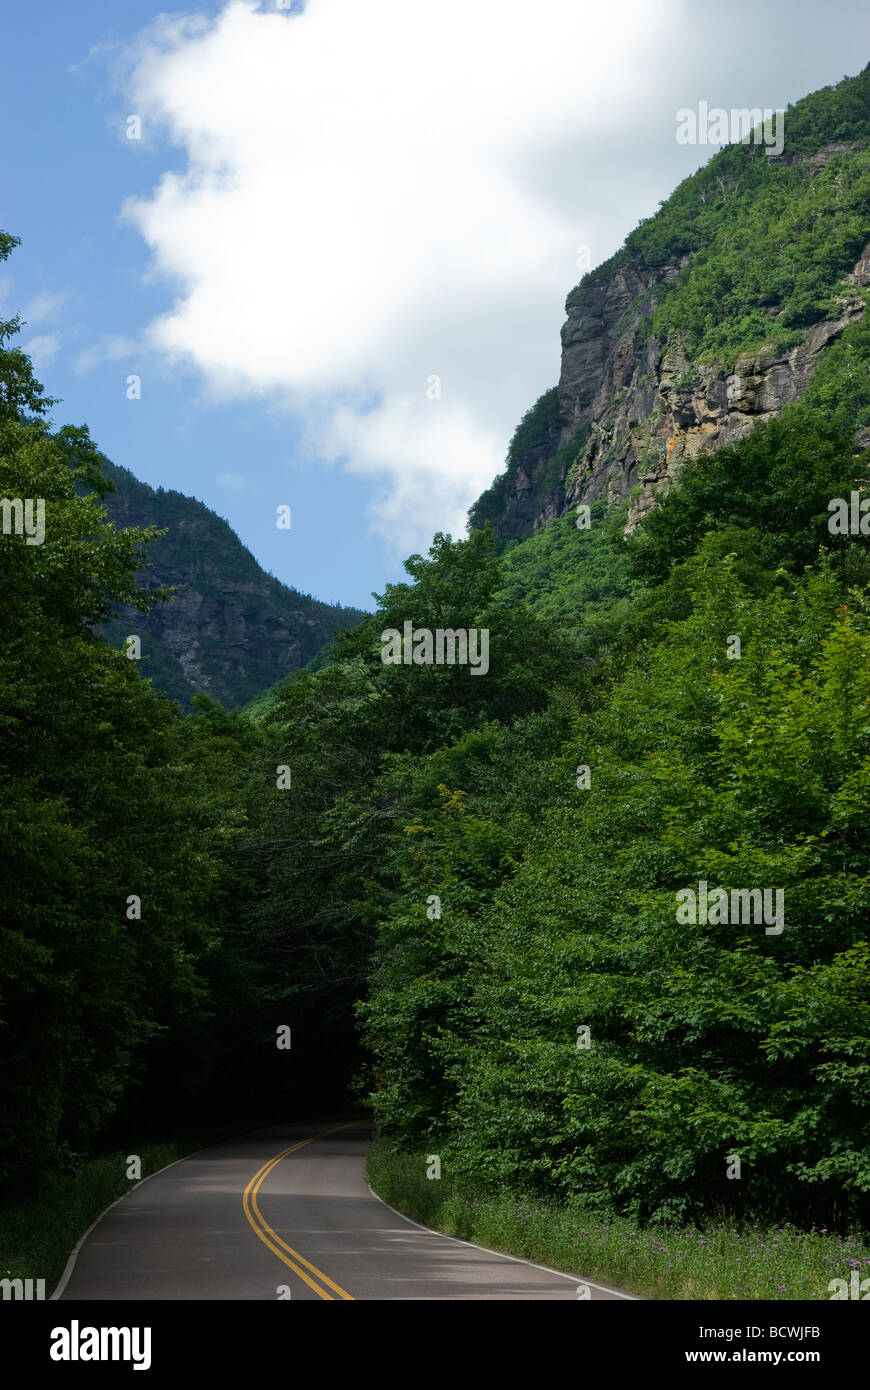 Road through Smuggler's Notch at the top of the Green Mountains near Stowe, Vermont. Stock Photo